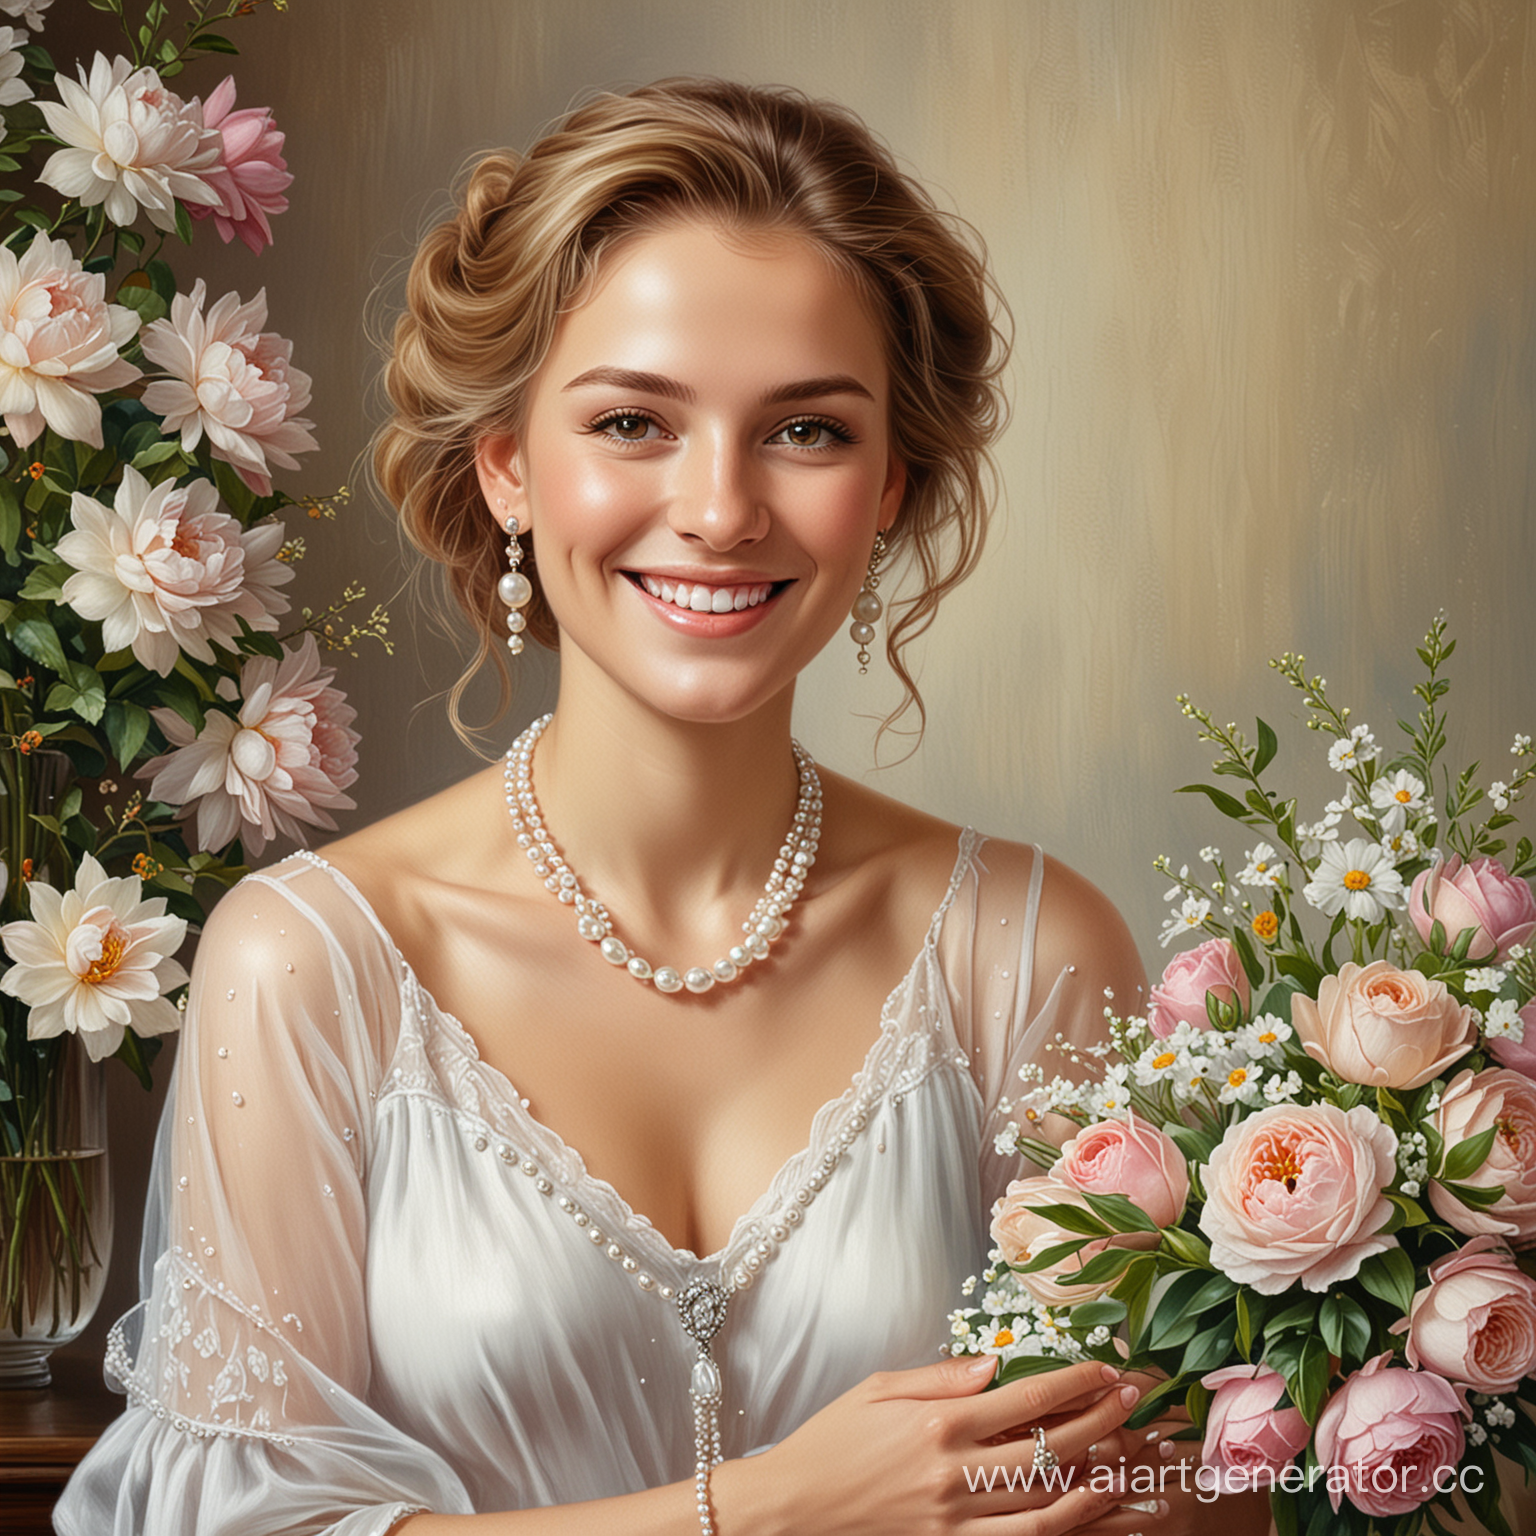 Oil painting: smiling woman in pearl jewelry stands with flowers.